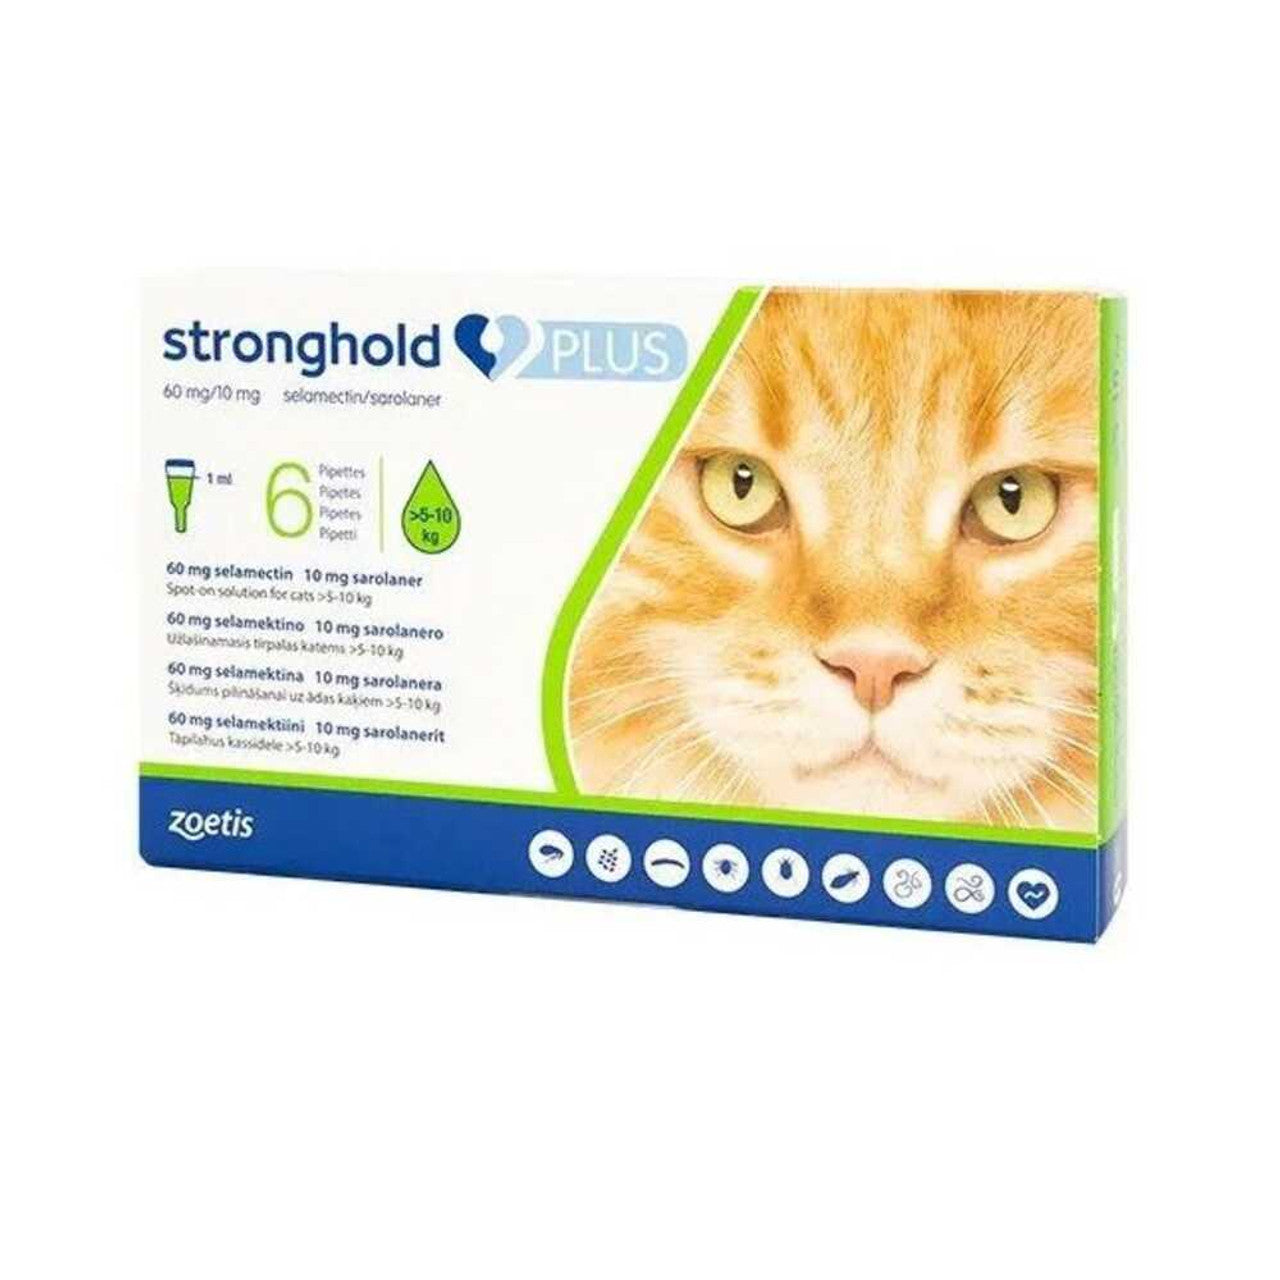 Stronghold Plus spot-on for Large Cats